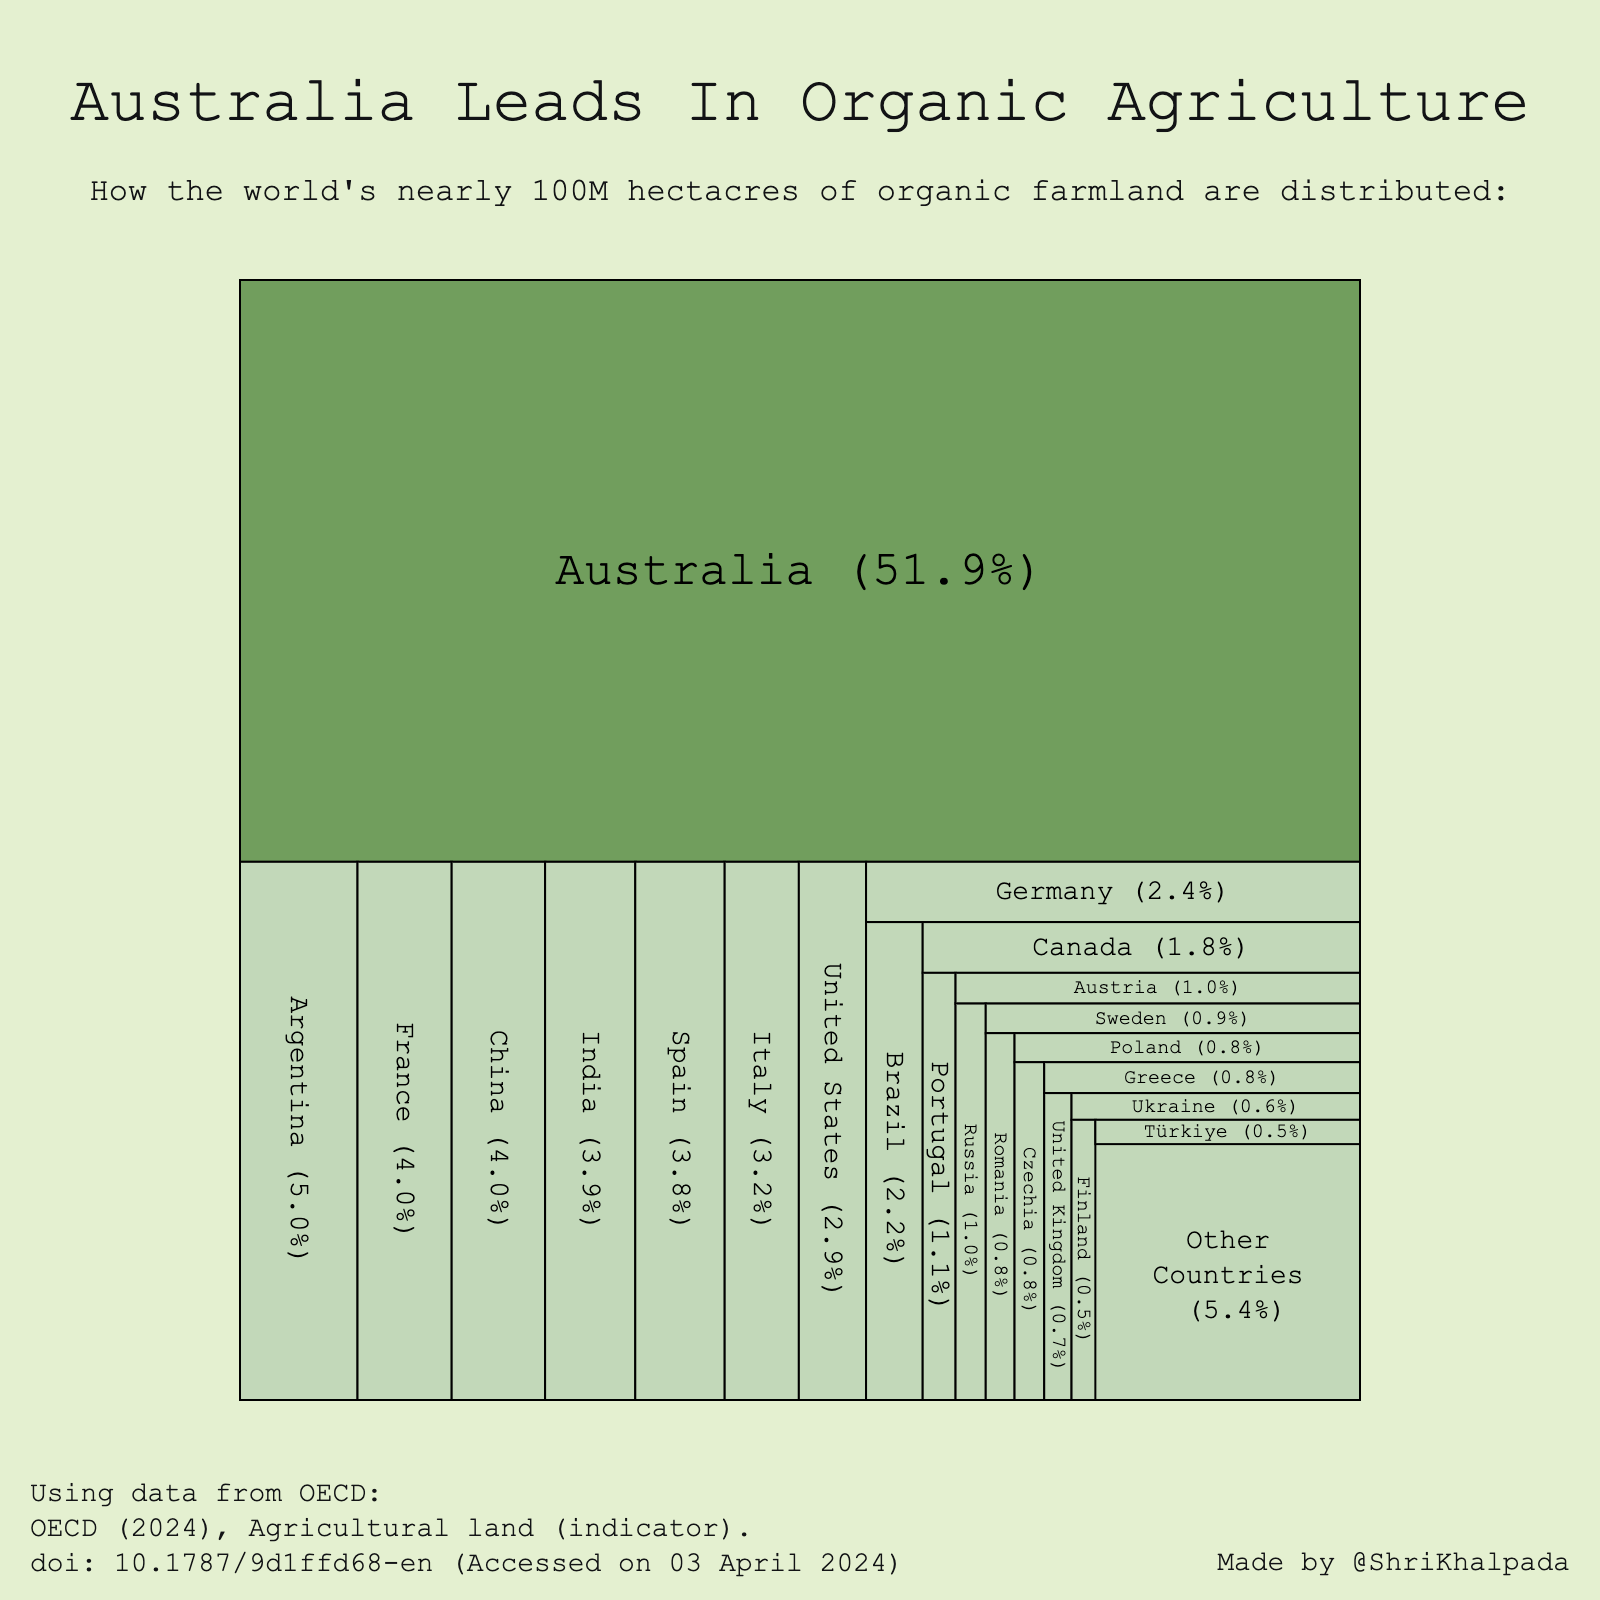 A bar chart titled "Australia Leads In Organic Agriculture," illustrating the percentage of the world's organic farmland by country, with Australia having the largest share.